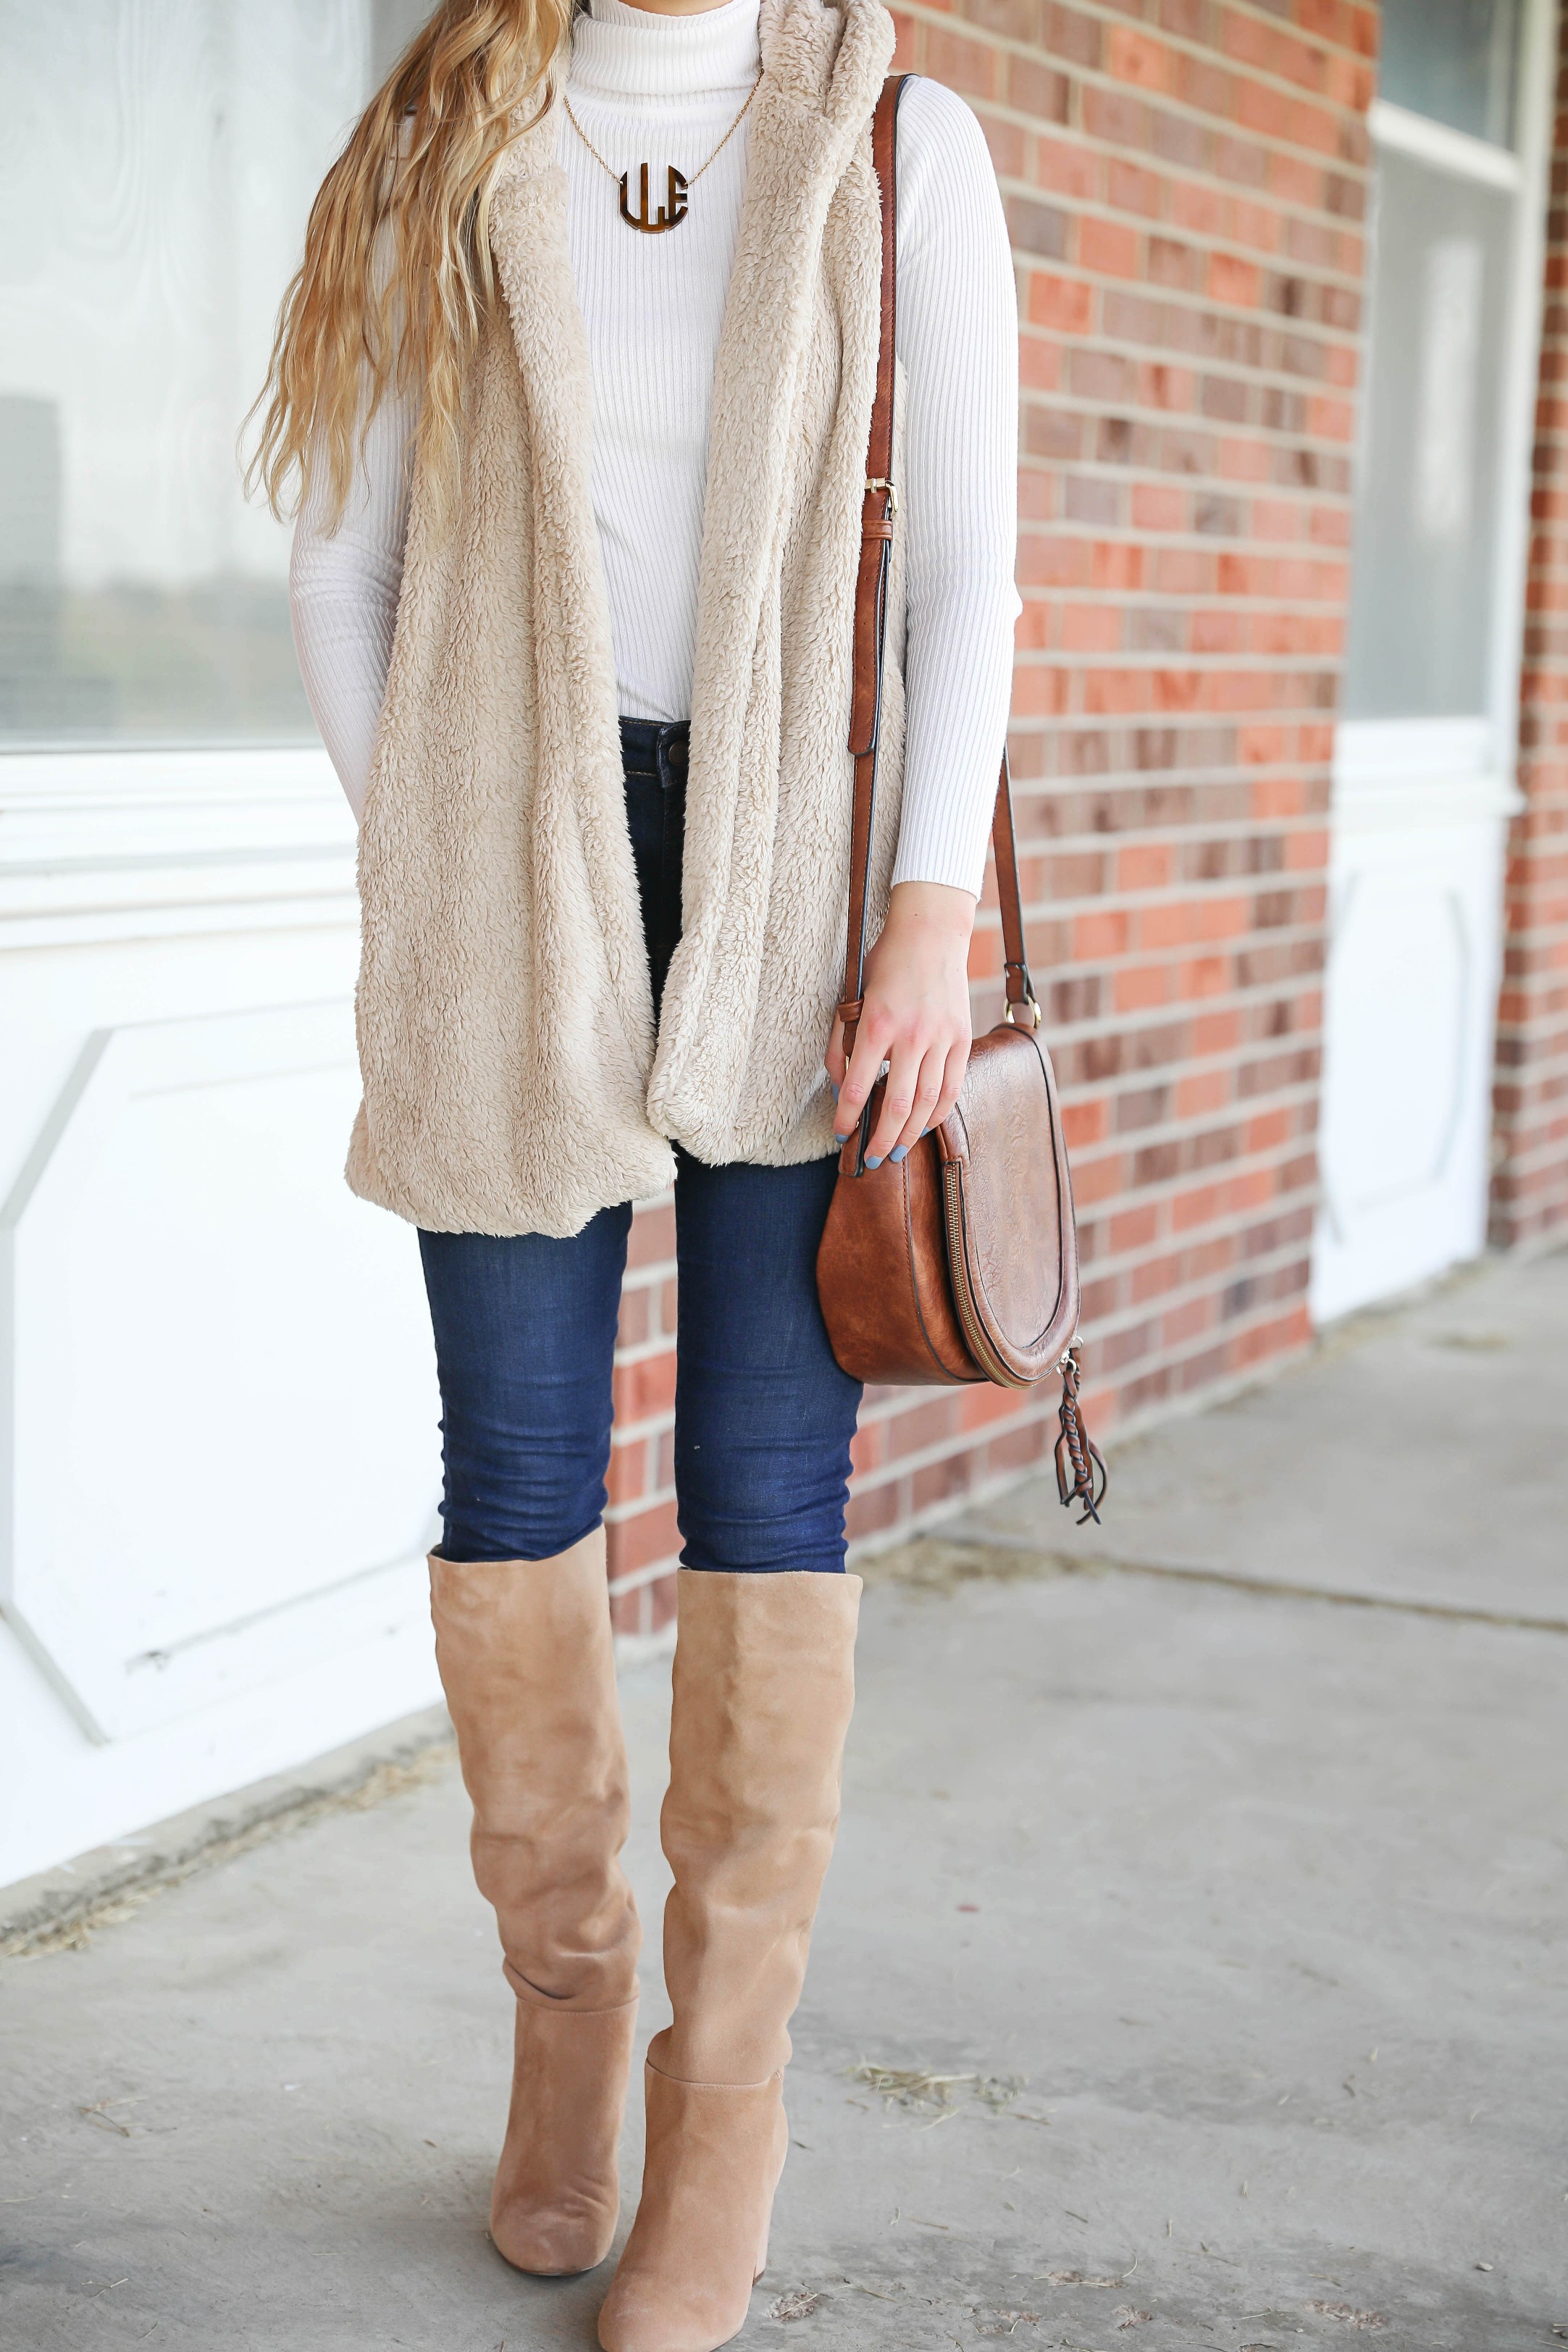 Teddy bear vest for fall! I love soft clothing and this long vest makes for the perfect fall outfit! I paired with a cute white turtleneck and monogram necklace! Plus my favorite shoes for fall are these tan sam edelman boots! Details on fashion blog daily dose of charm by lauren lindmark